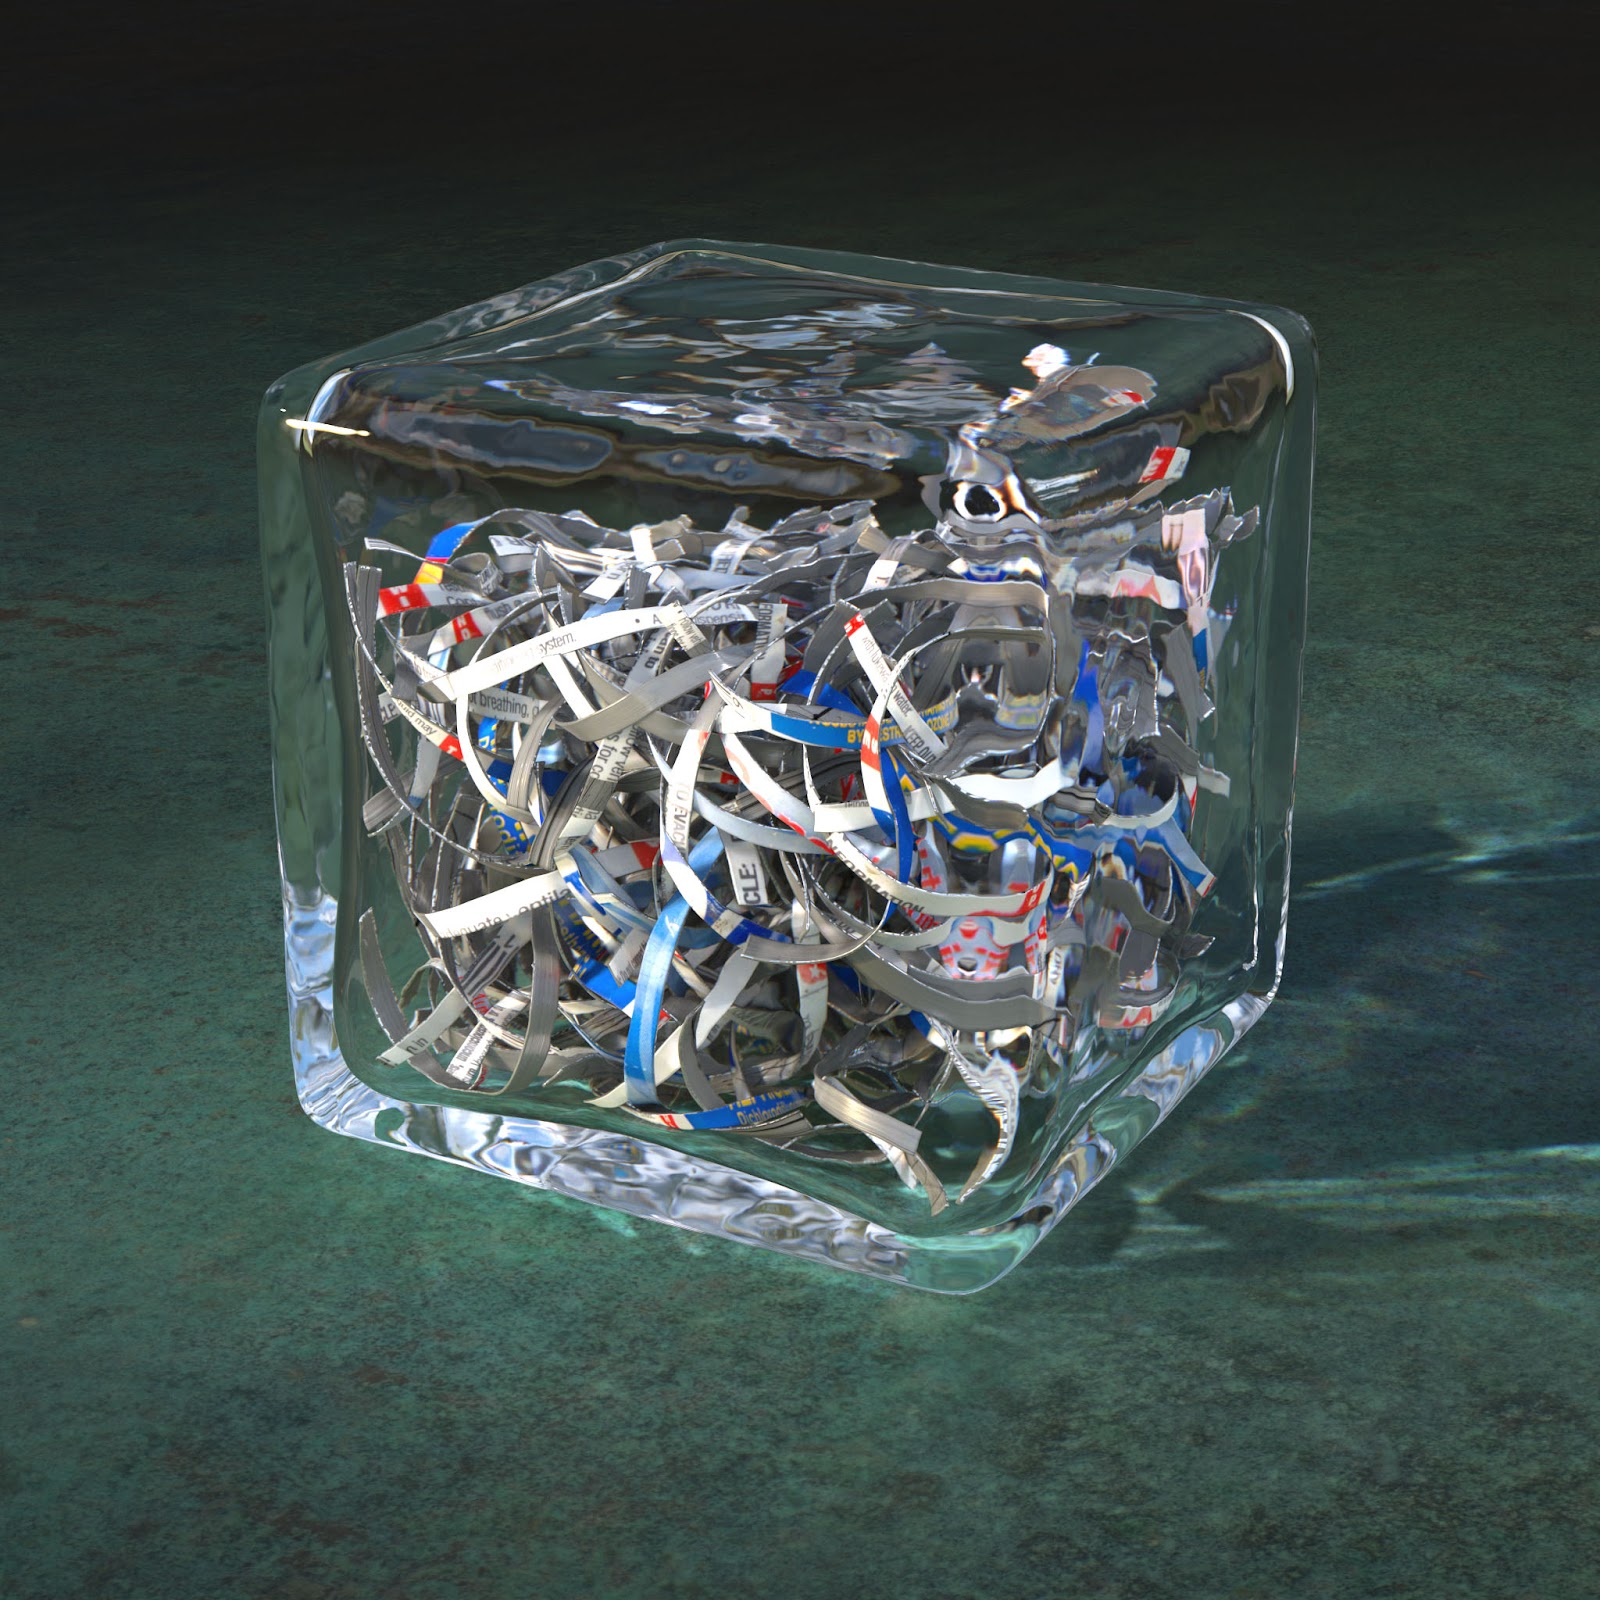 Photorealistic render of a glass block with thick and imperfect walls, mostly filled with spiraling white and blue metal strips. Caustics and refraction scatter light through the block and onto a floor like rusted copper.